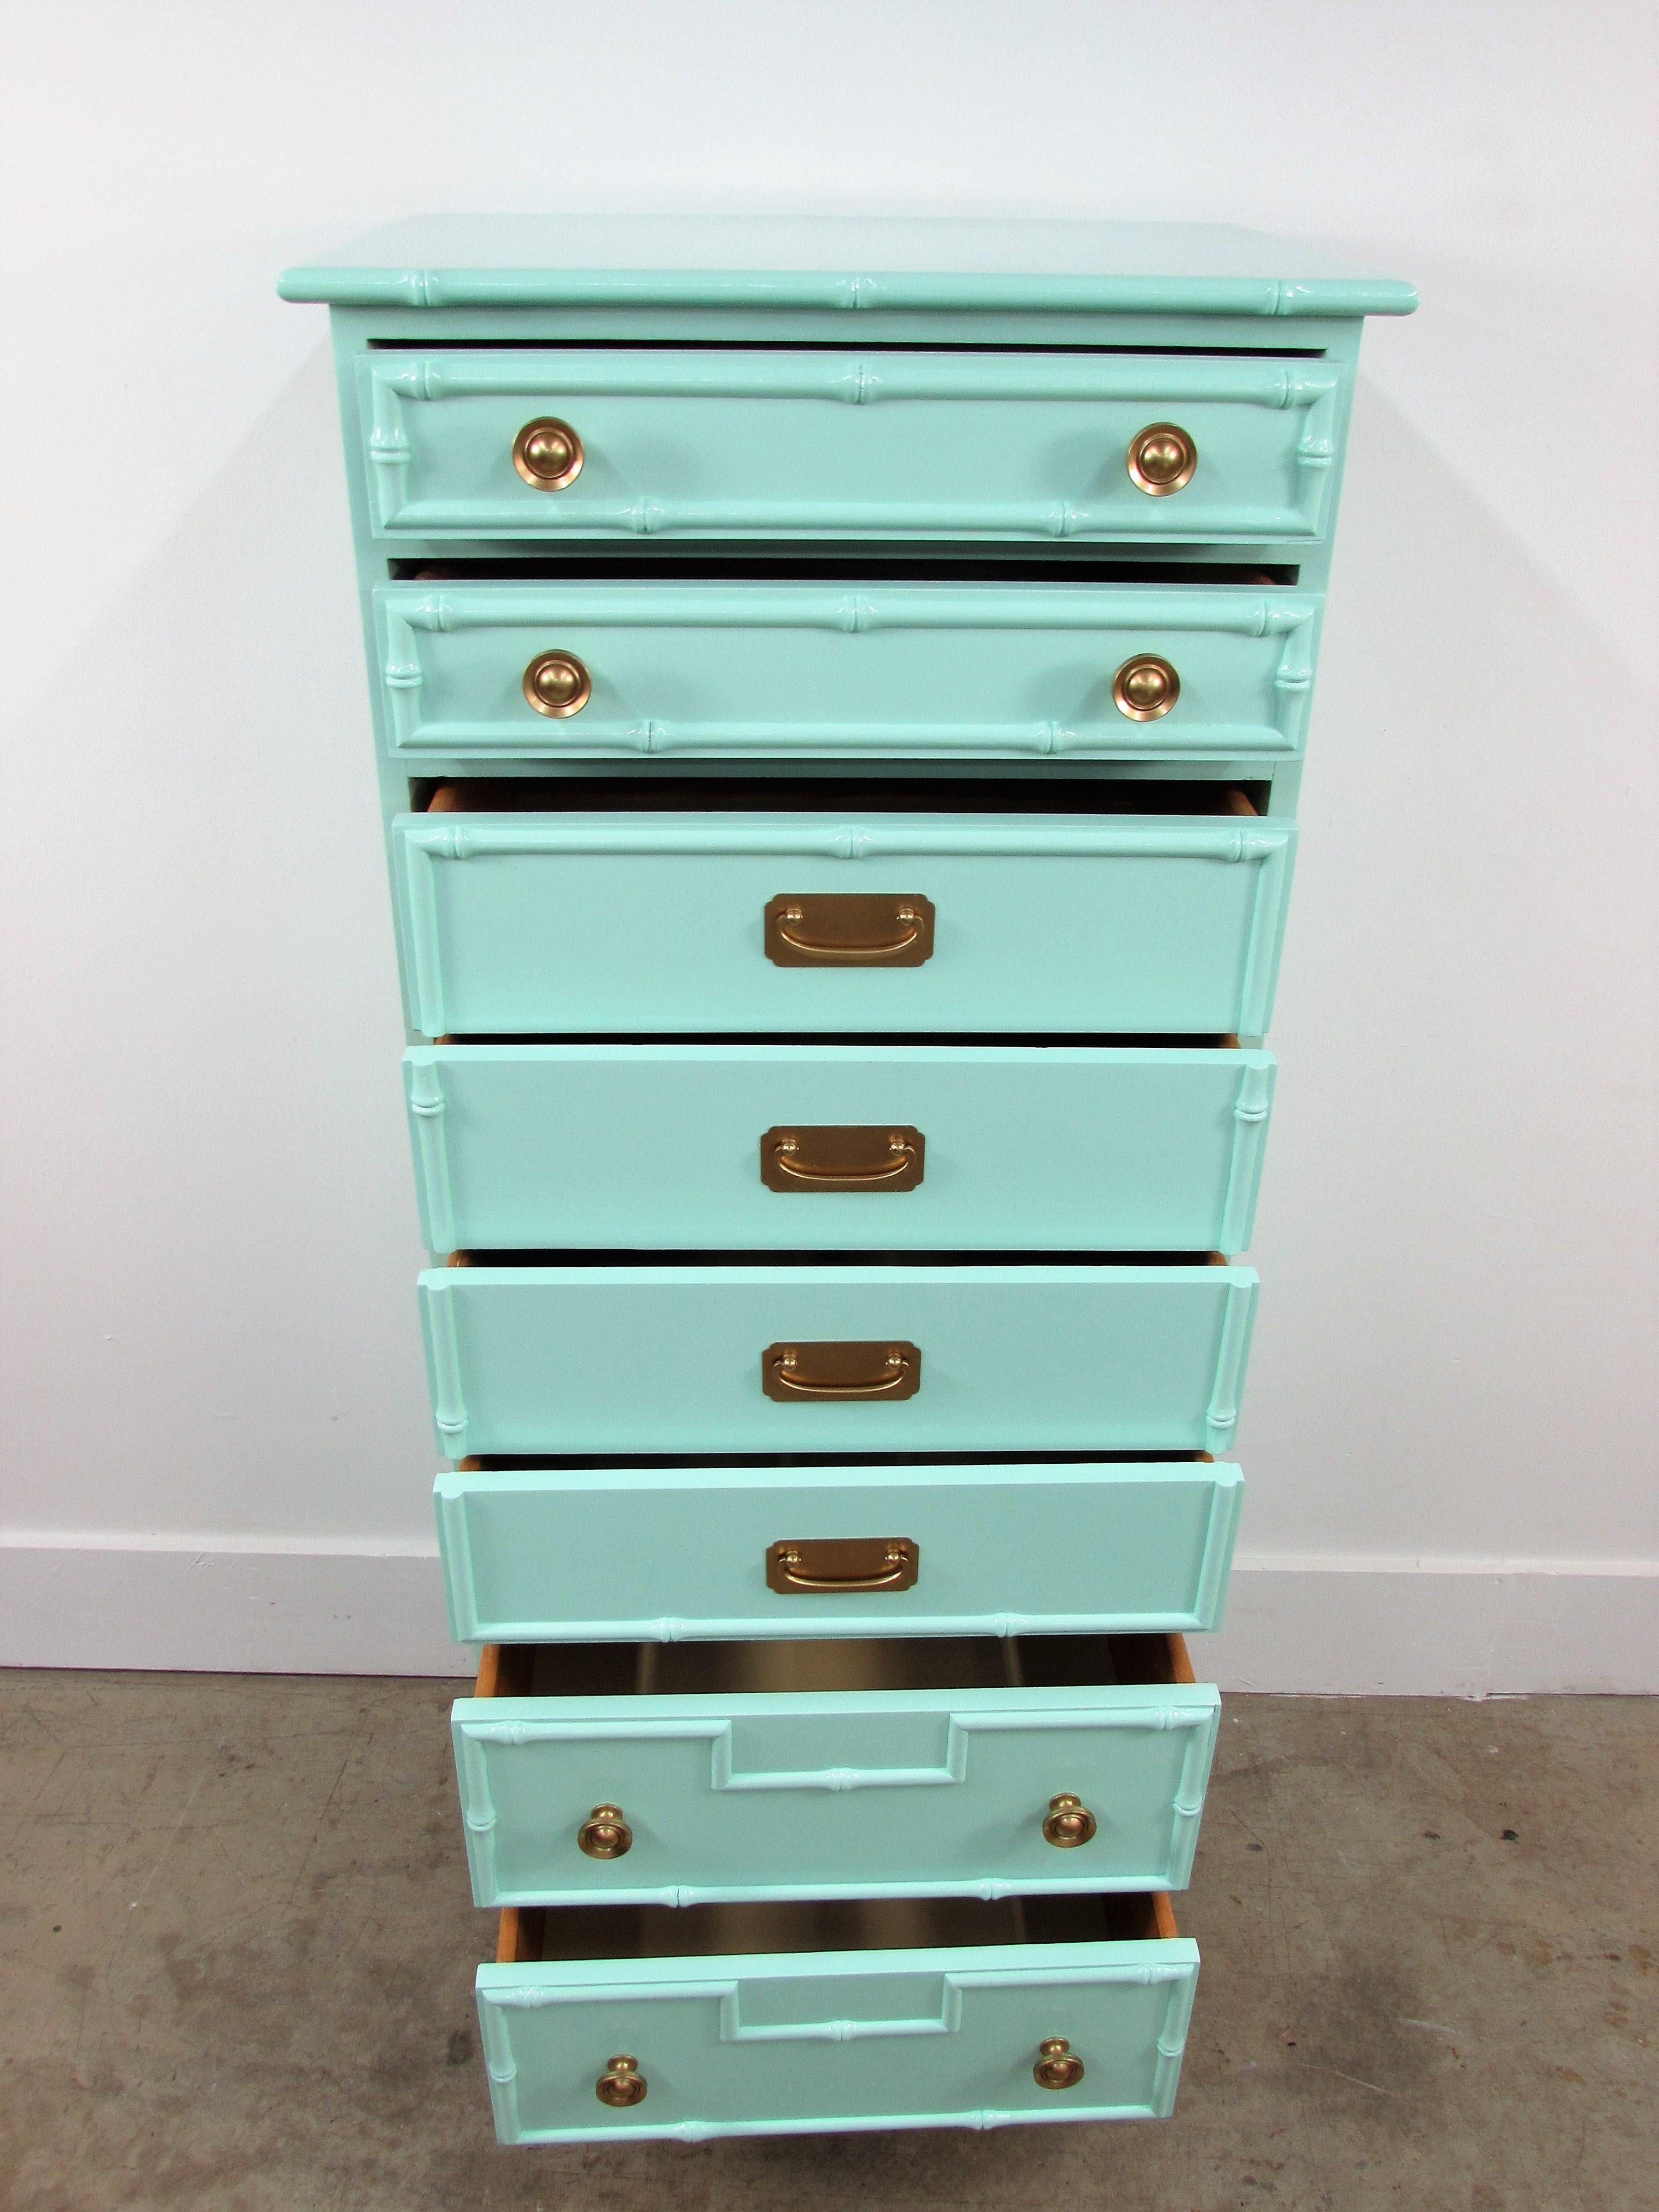 Ficks reed faux bamboo lingerie chest lacquered in Benjamin Moore 2039-60 Seafoam Green gloss finish and customized in-house with eight drawers suspended on four legs.